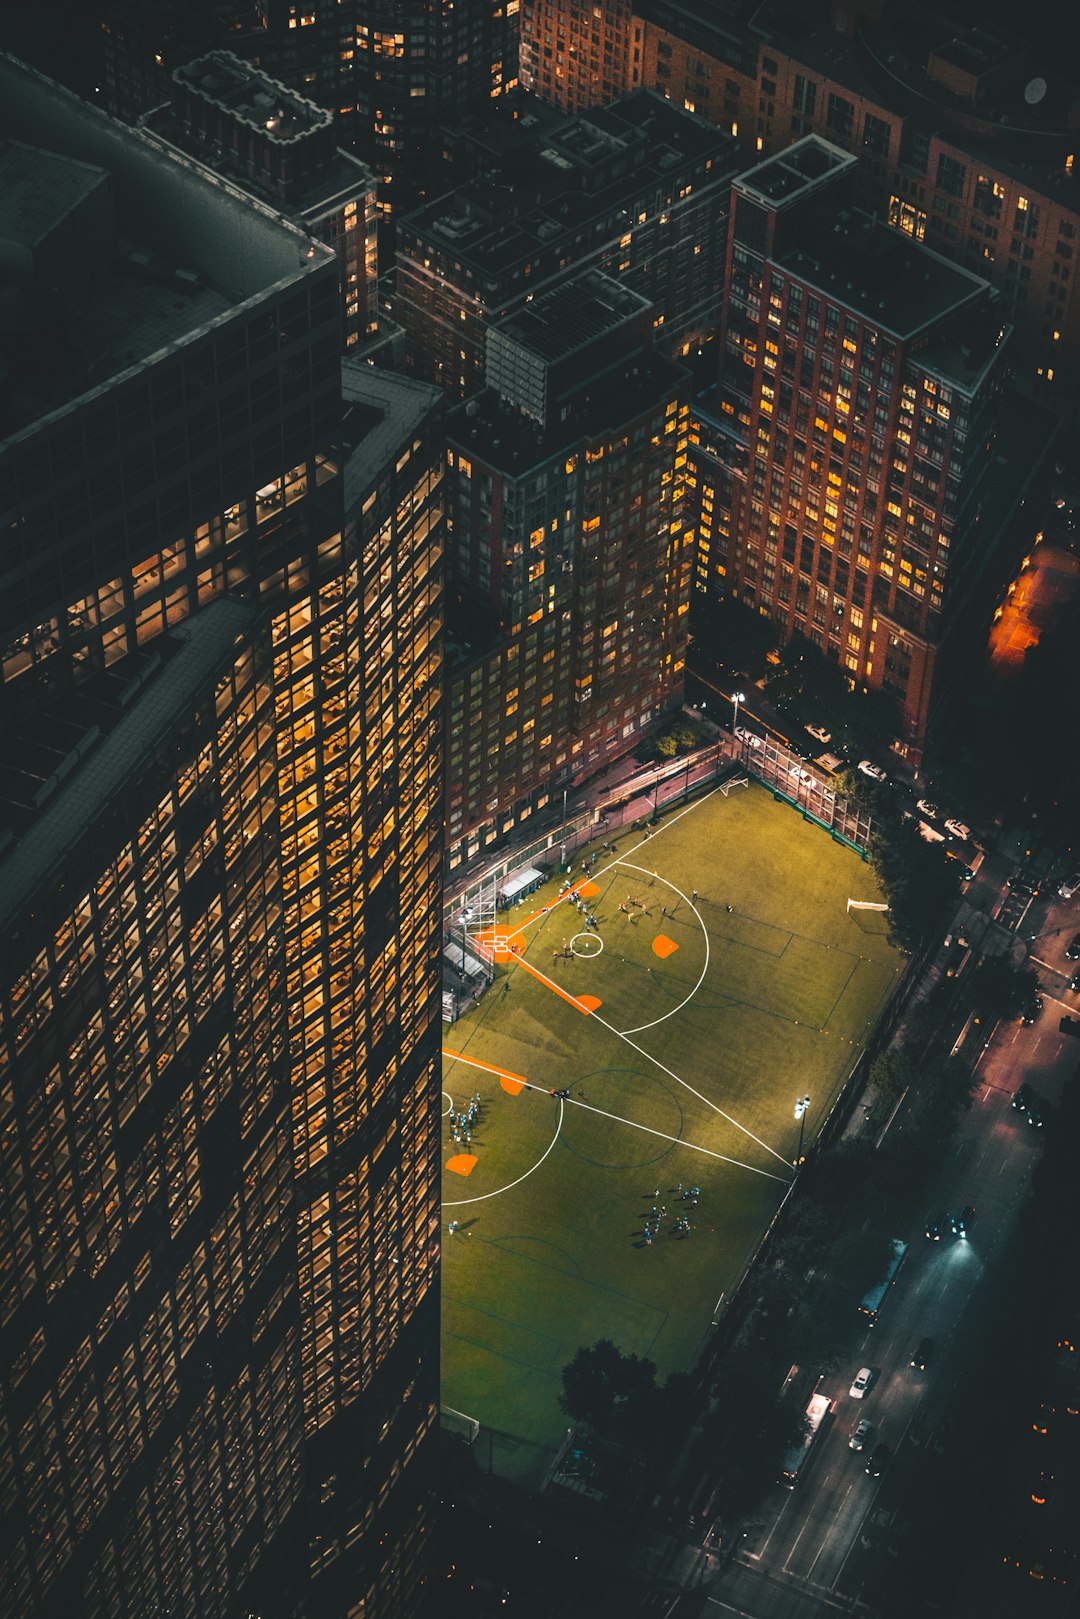 aerial view of basketball court during night time